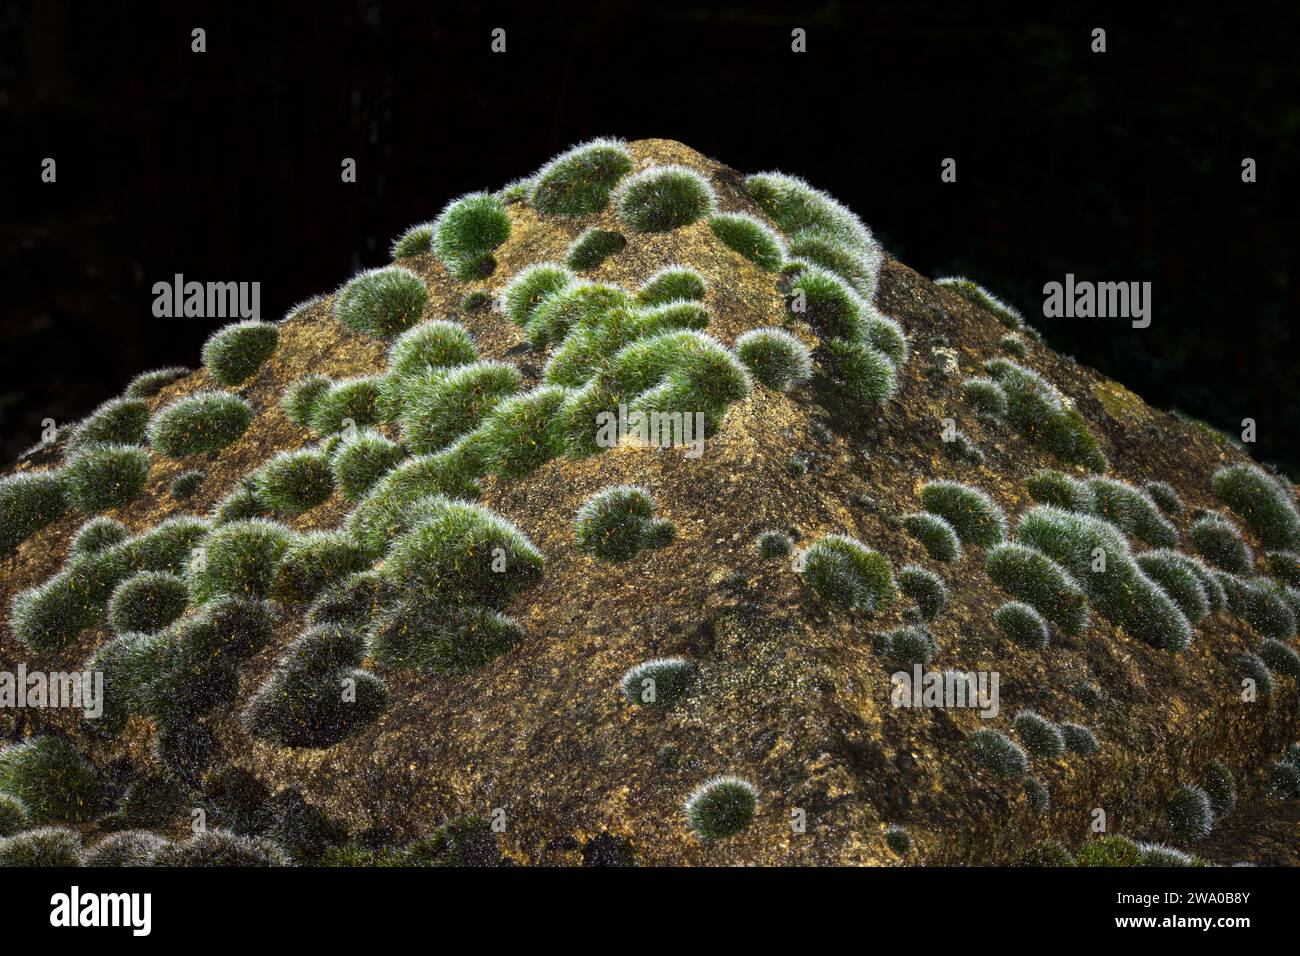 Grimmia pulvinata is a moss that grows on rocks, walls, concrete and tree trunks, and occurs in temperate climates worldwide. Stock Photo